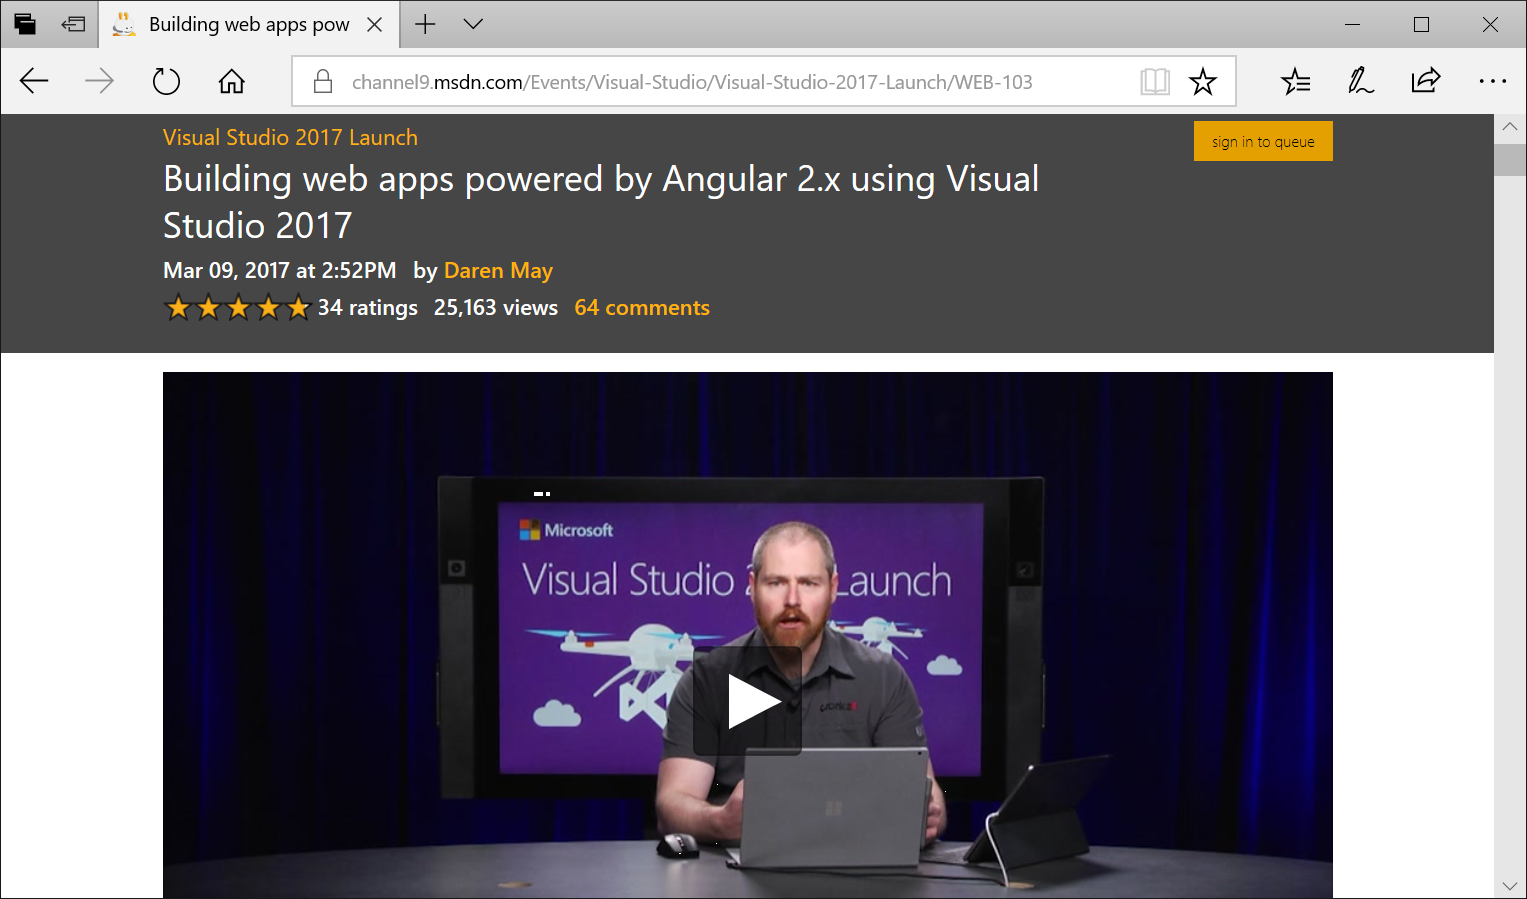 Web page with a video showing Daren May teaching how to use Angular and DOT NET Core together